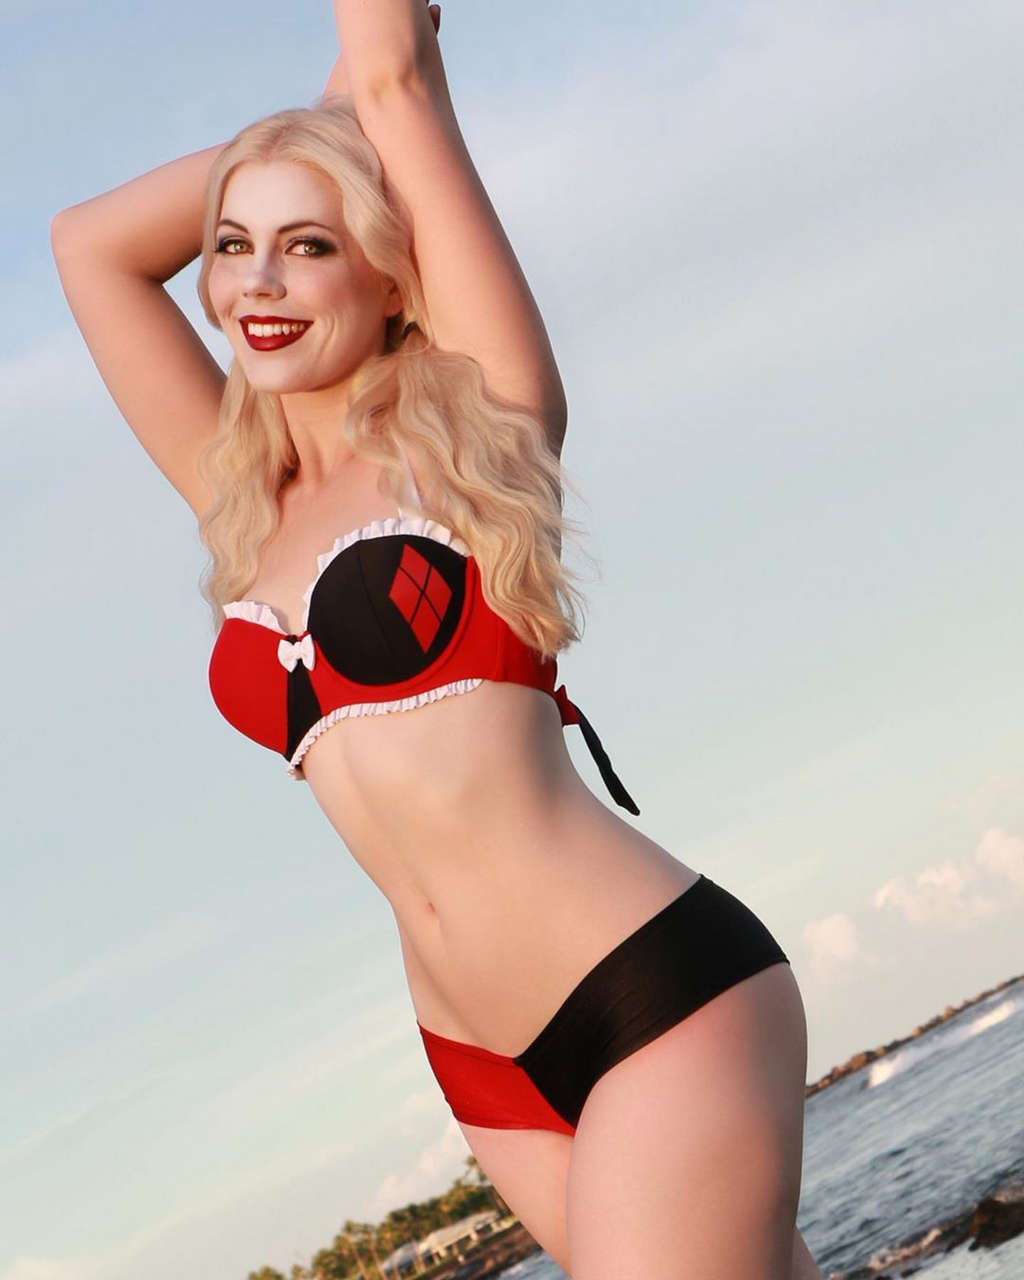 Genevieve Marie As Harley Quin